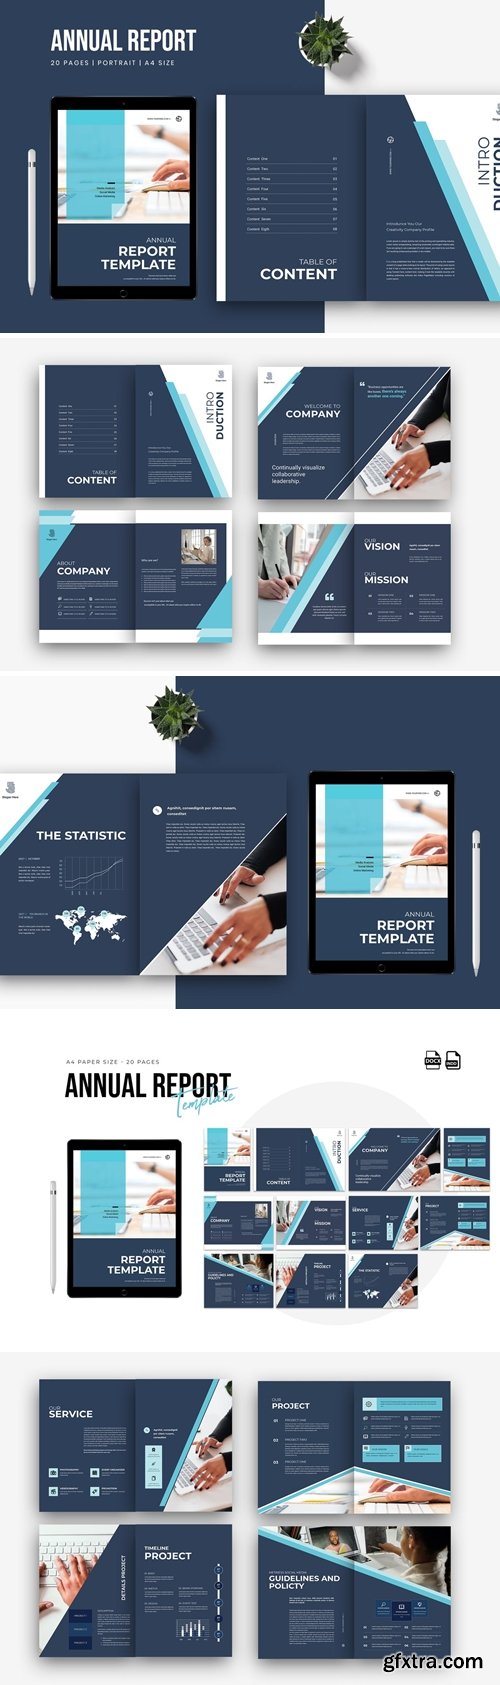 Annual Report Proposal